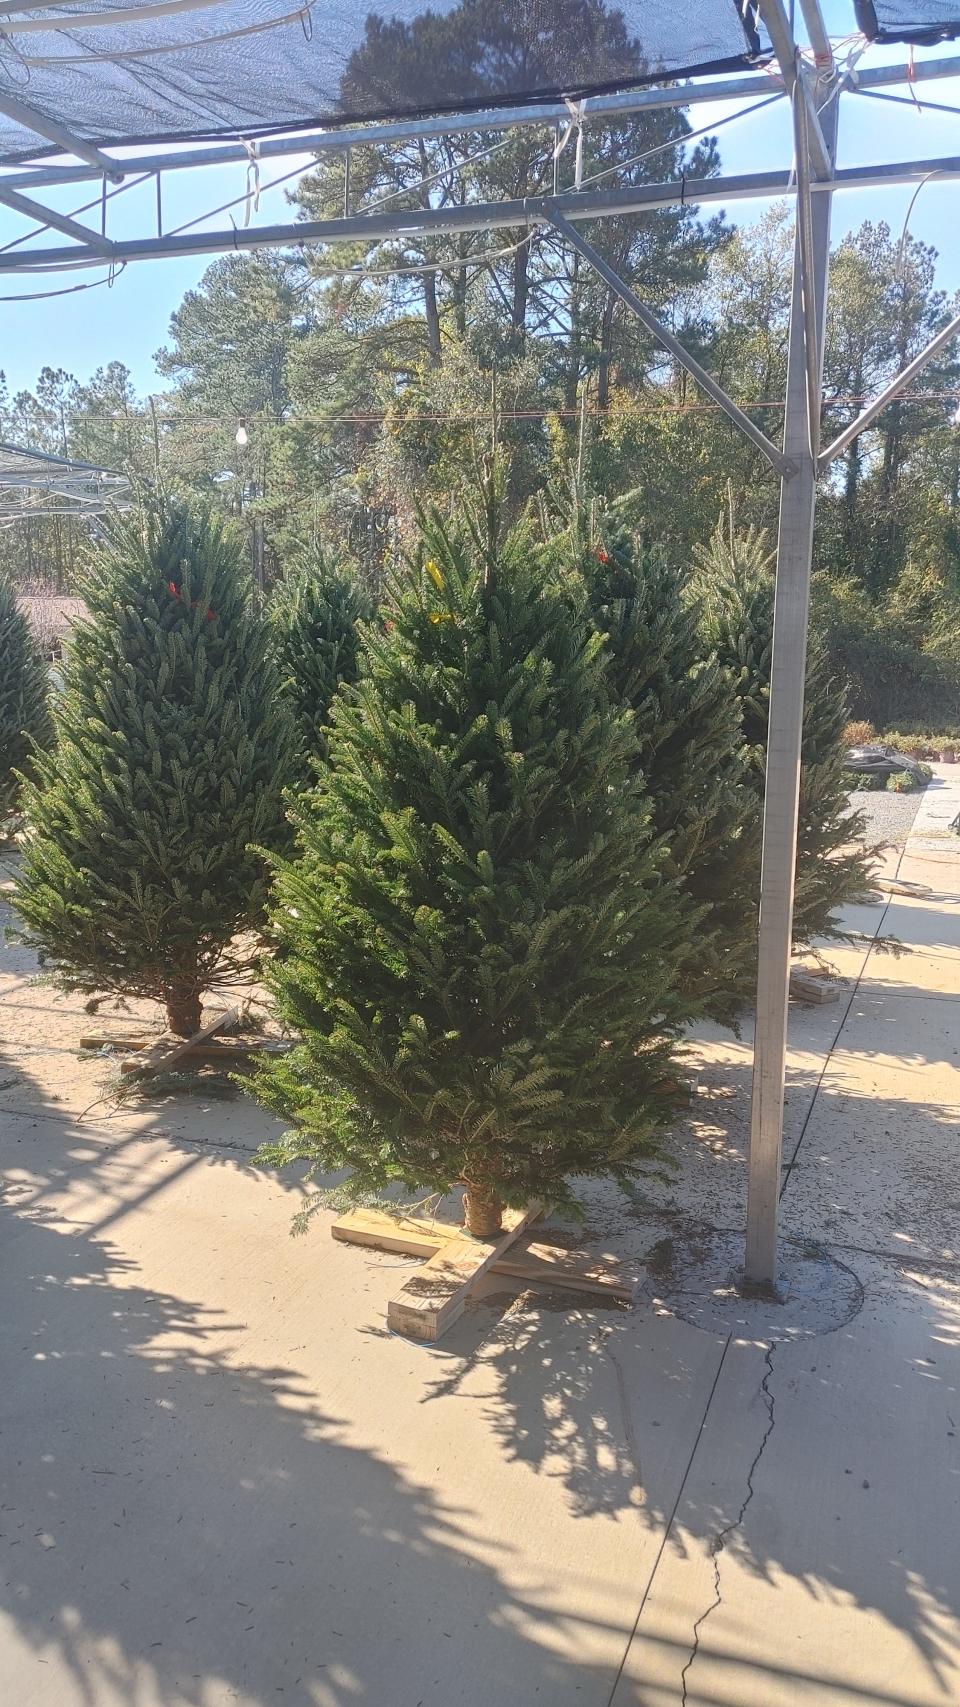 Christmas trees available at Pate's Farm Market at 6411 Raeford Rd in Fayetteville.